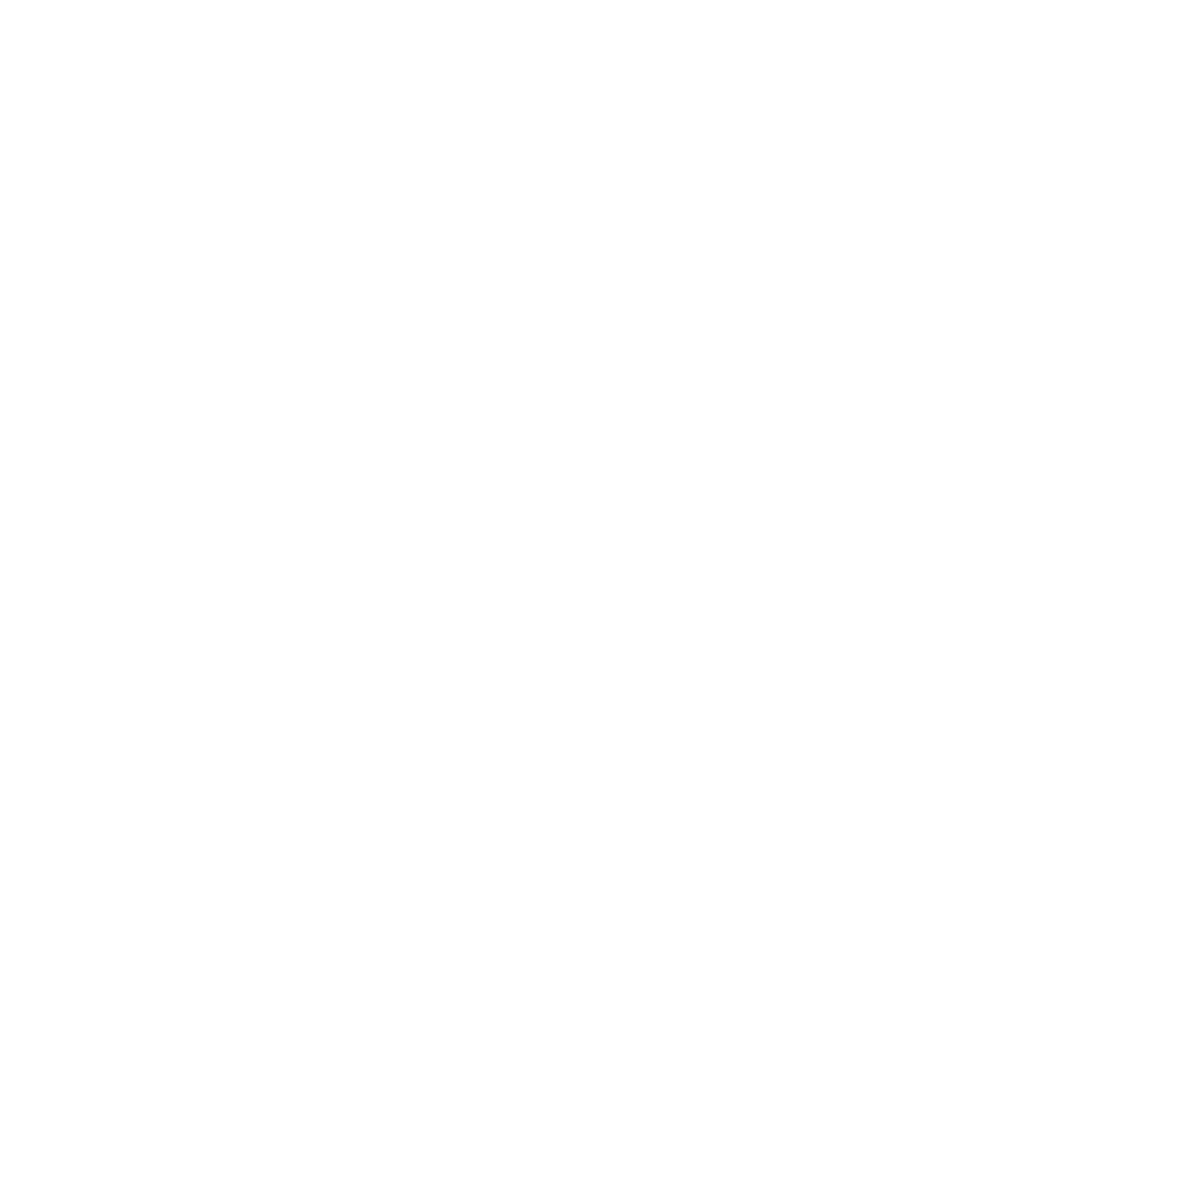 Tourism and Human Rights